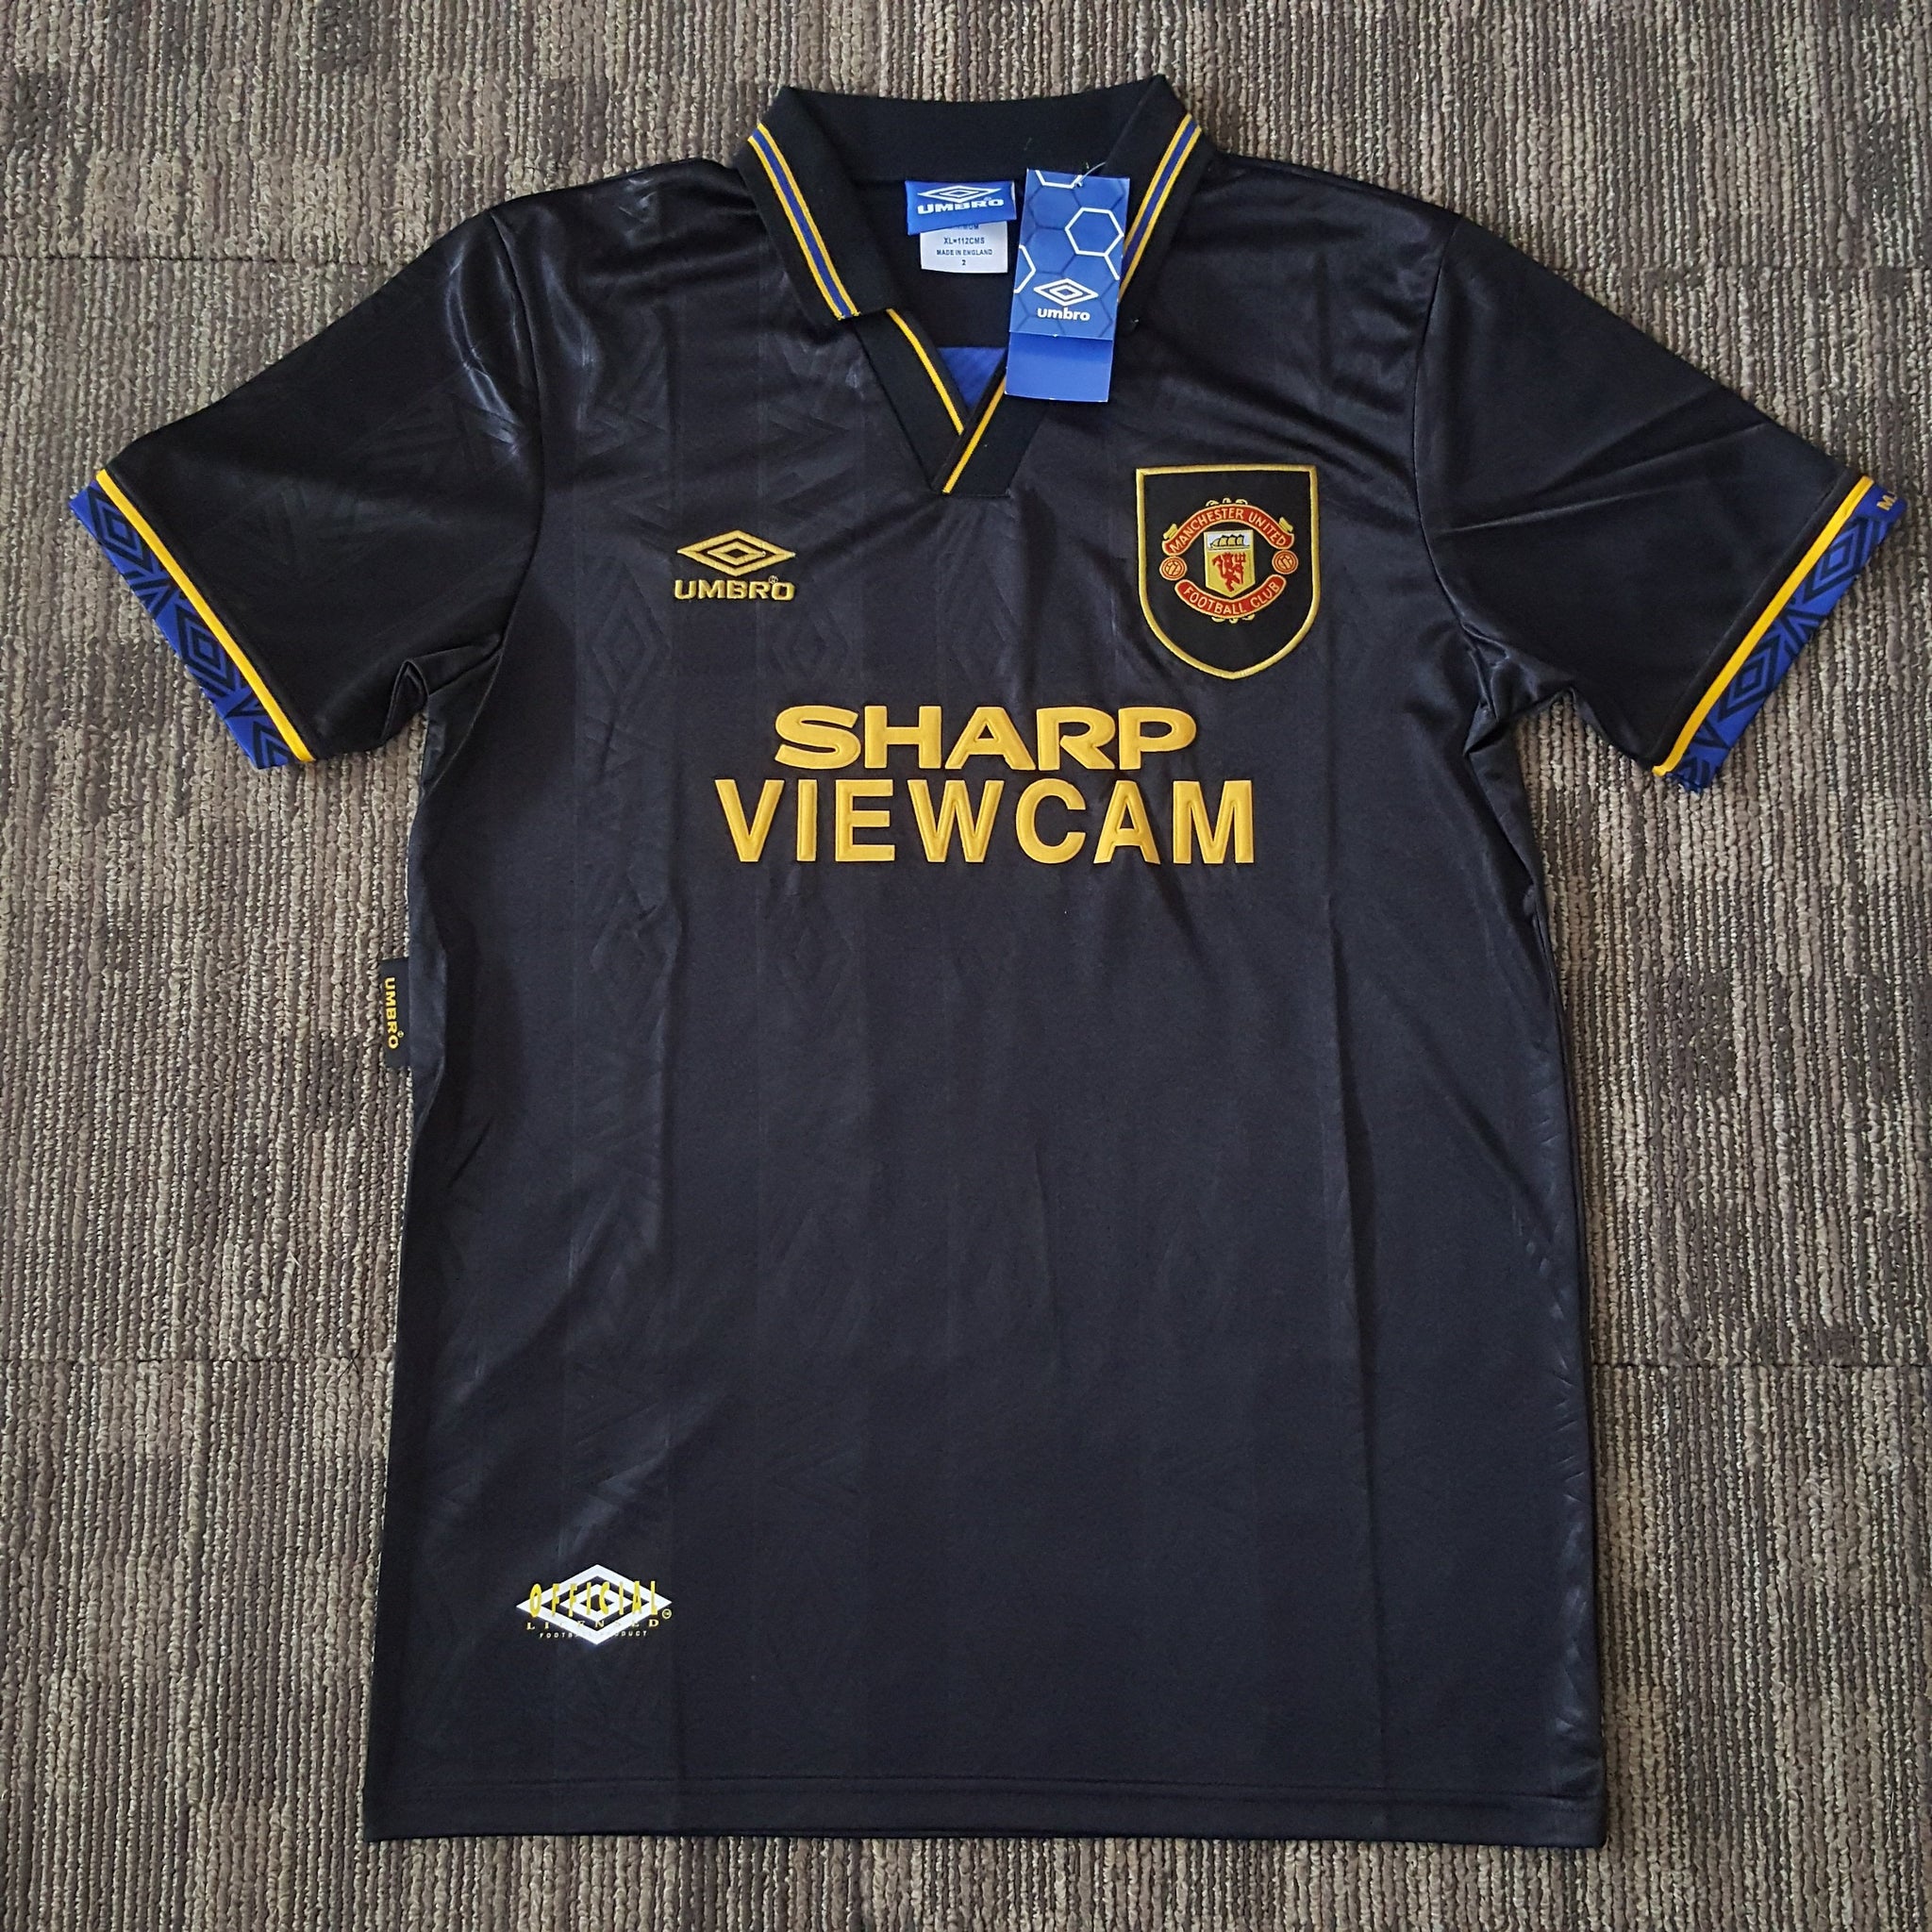 manchester united jersey 1994